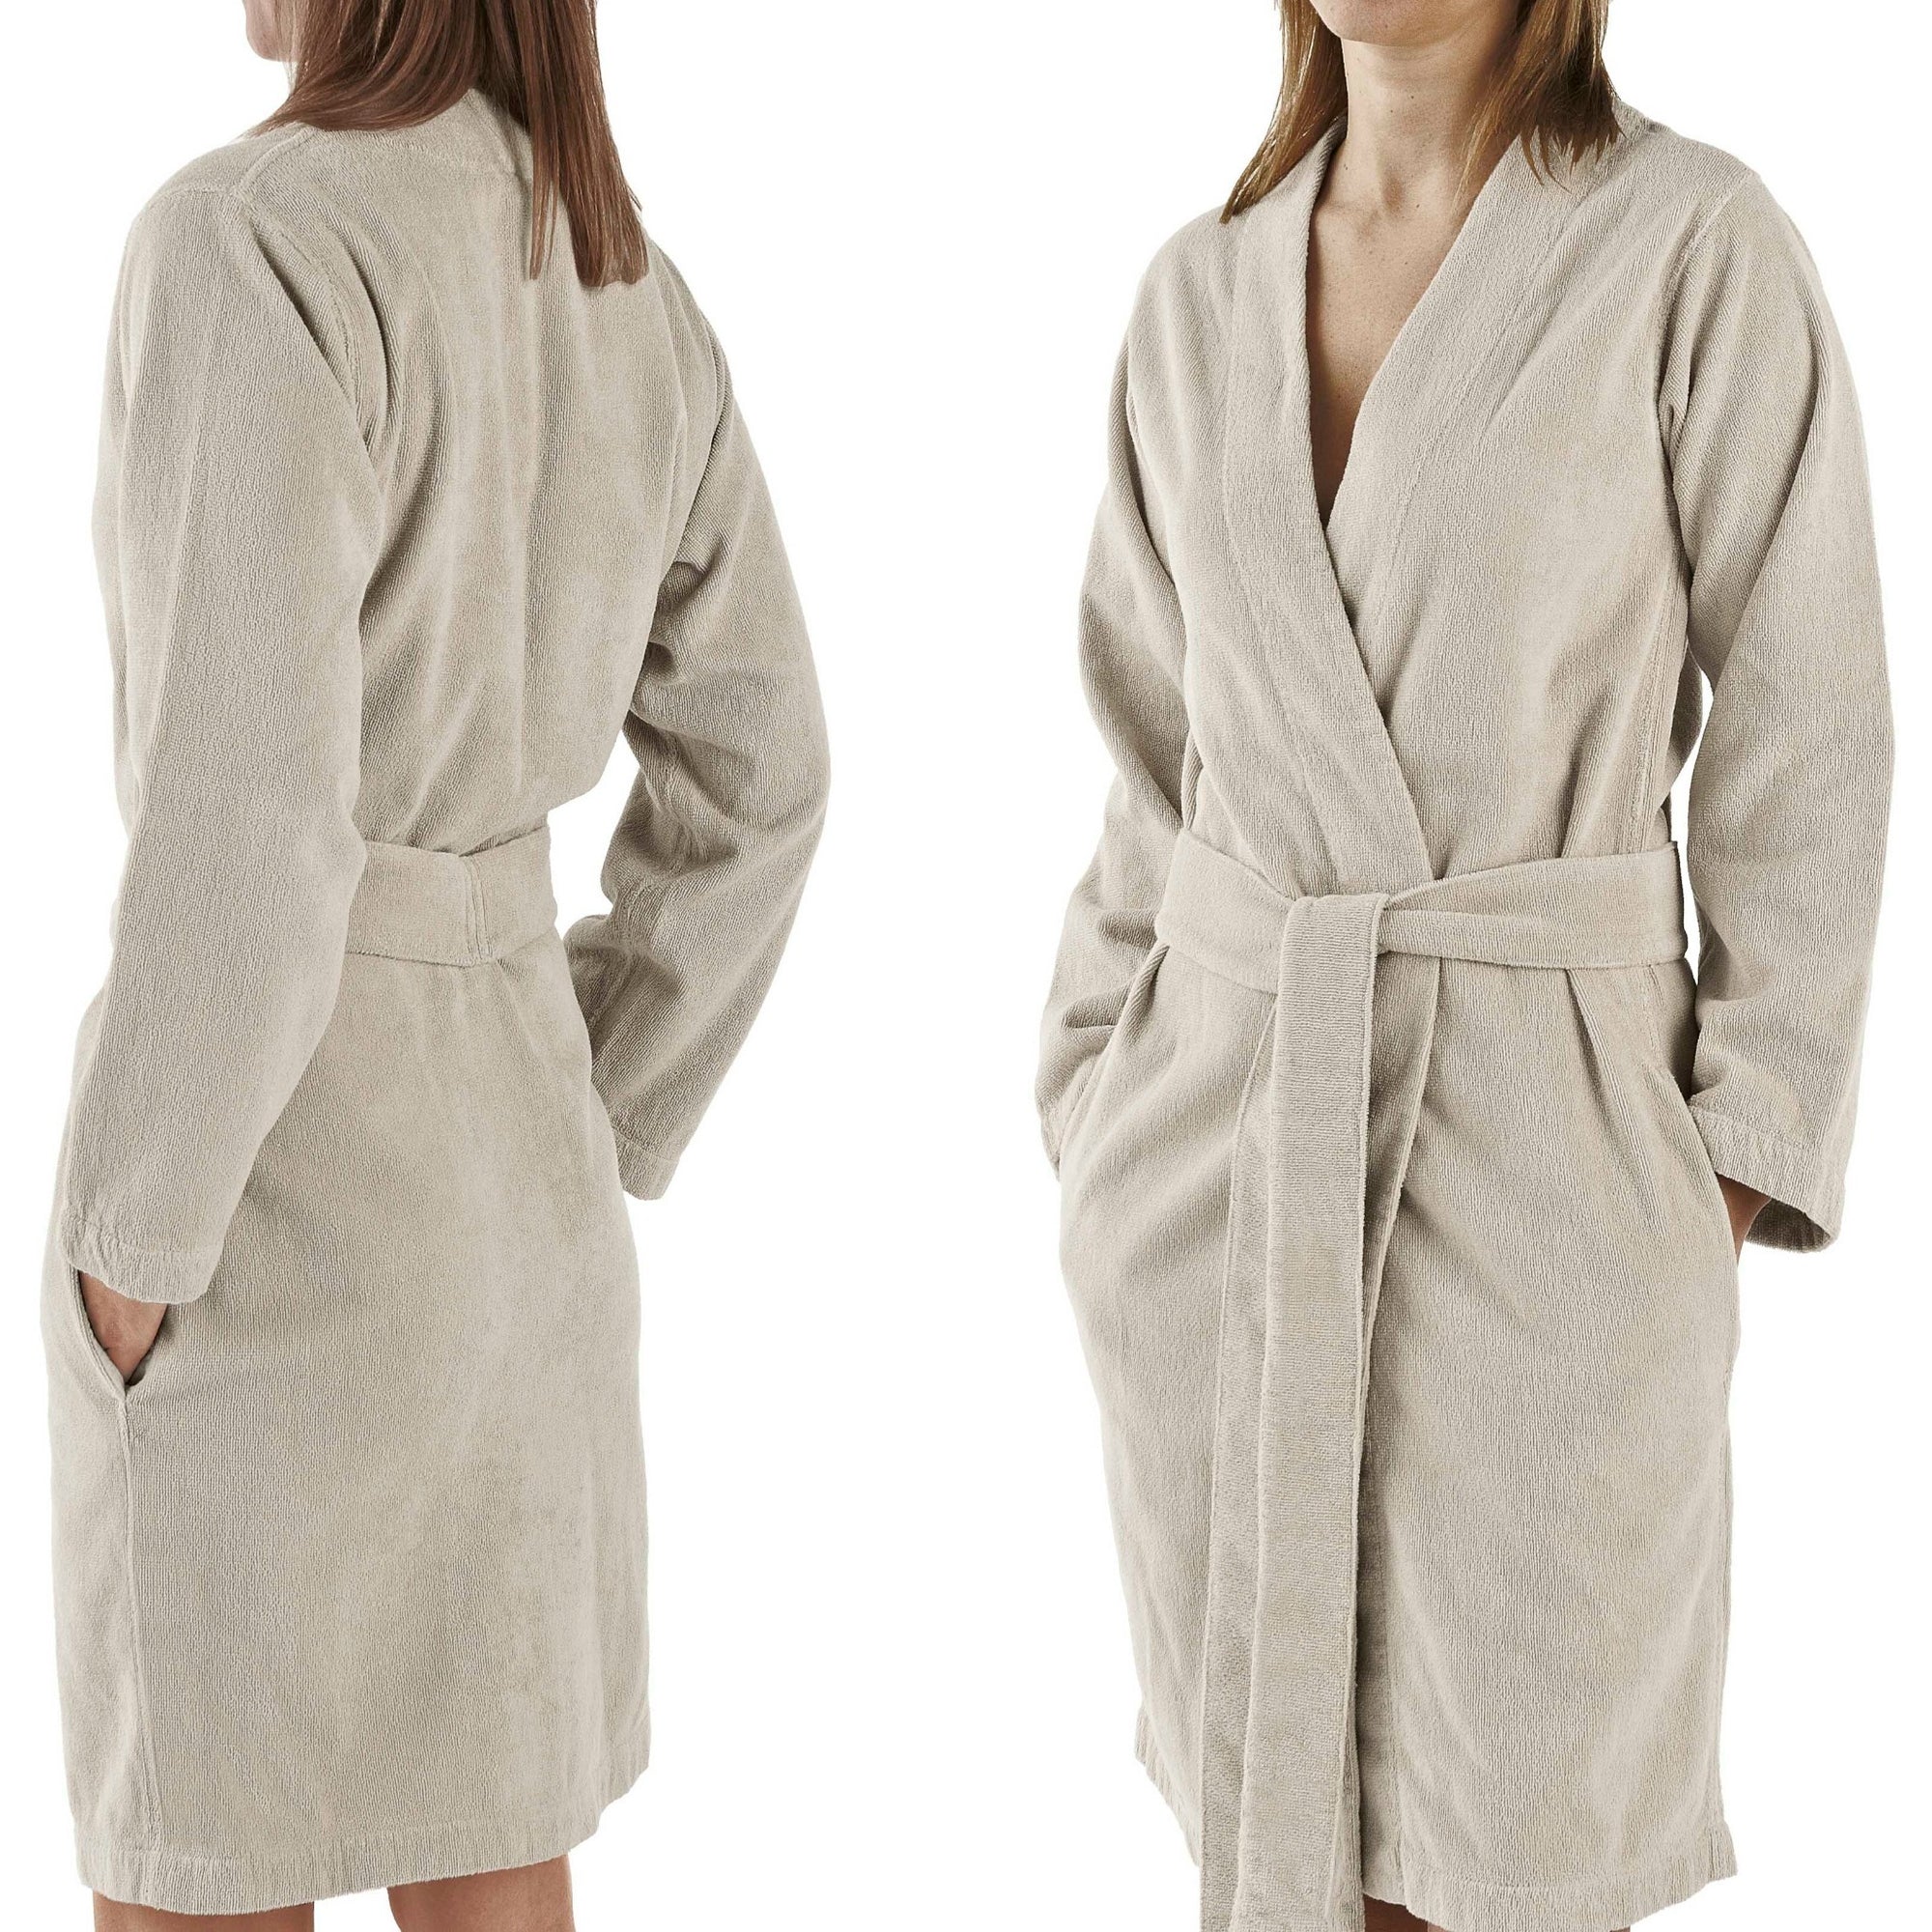 Abyss Spa Bath Robes and Slippers Front and Back Linen Fine Linens